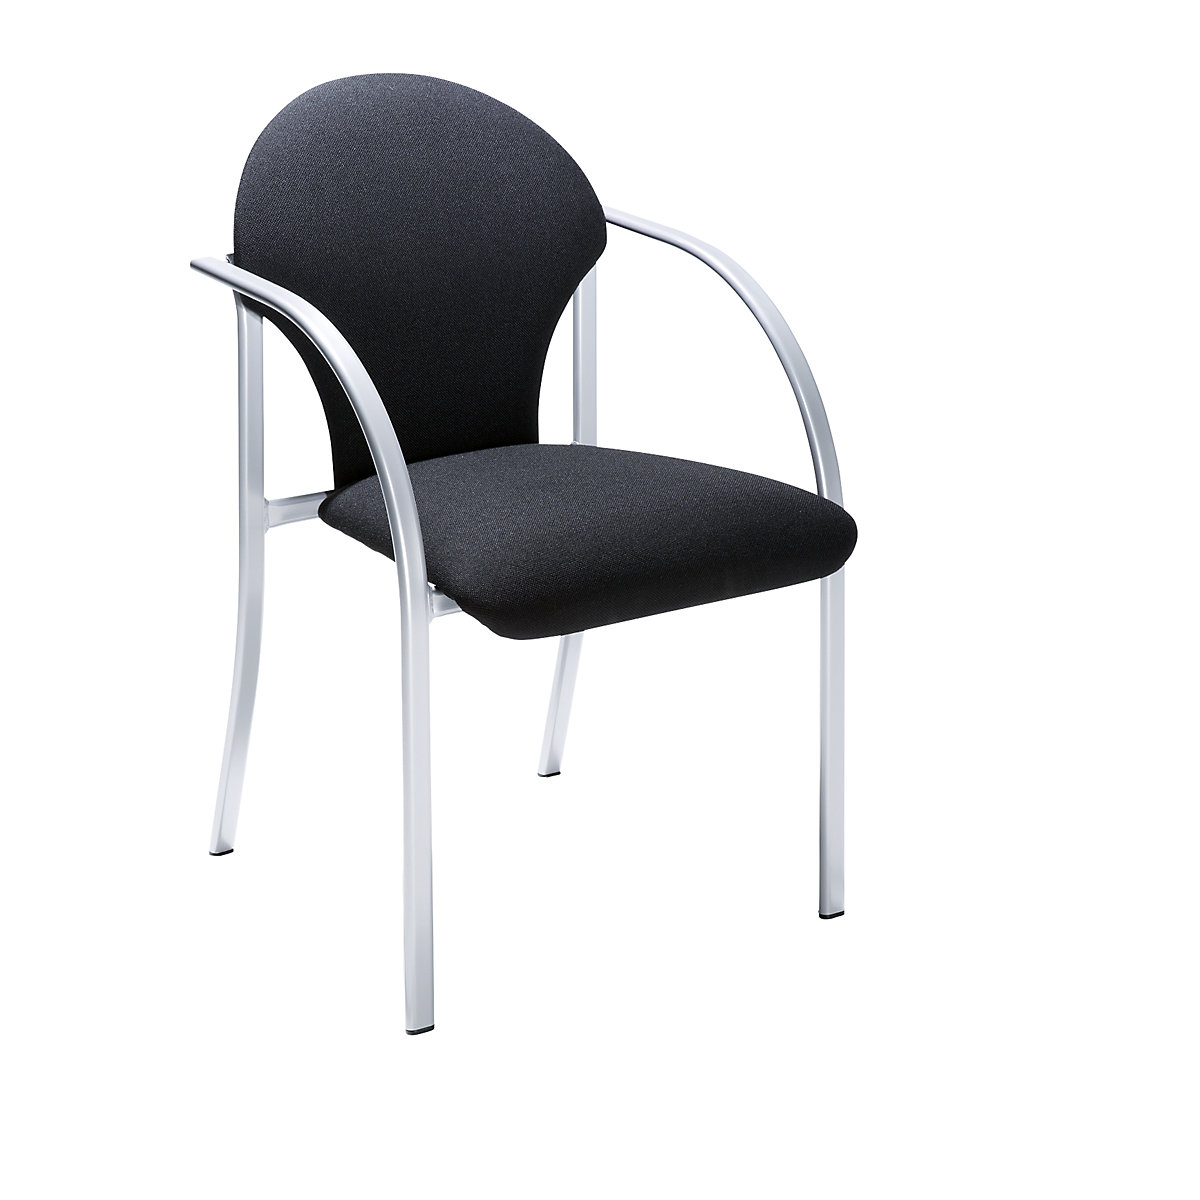 Padded stacking chair, seat HxWxD 470 x 450 x 490 mm, upholstery colour black, pack of 2-4